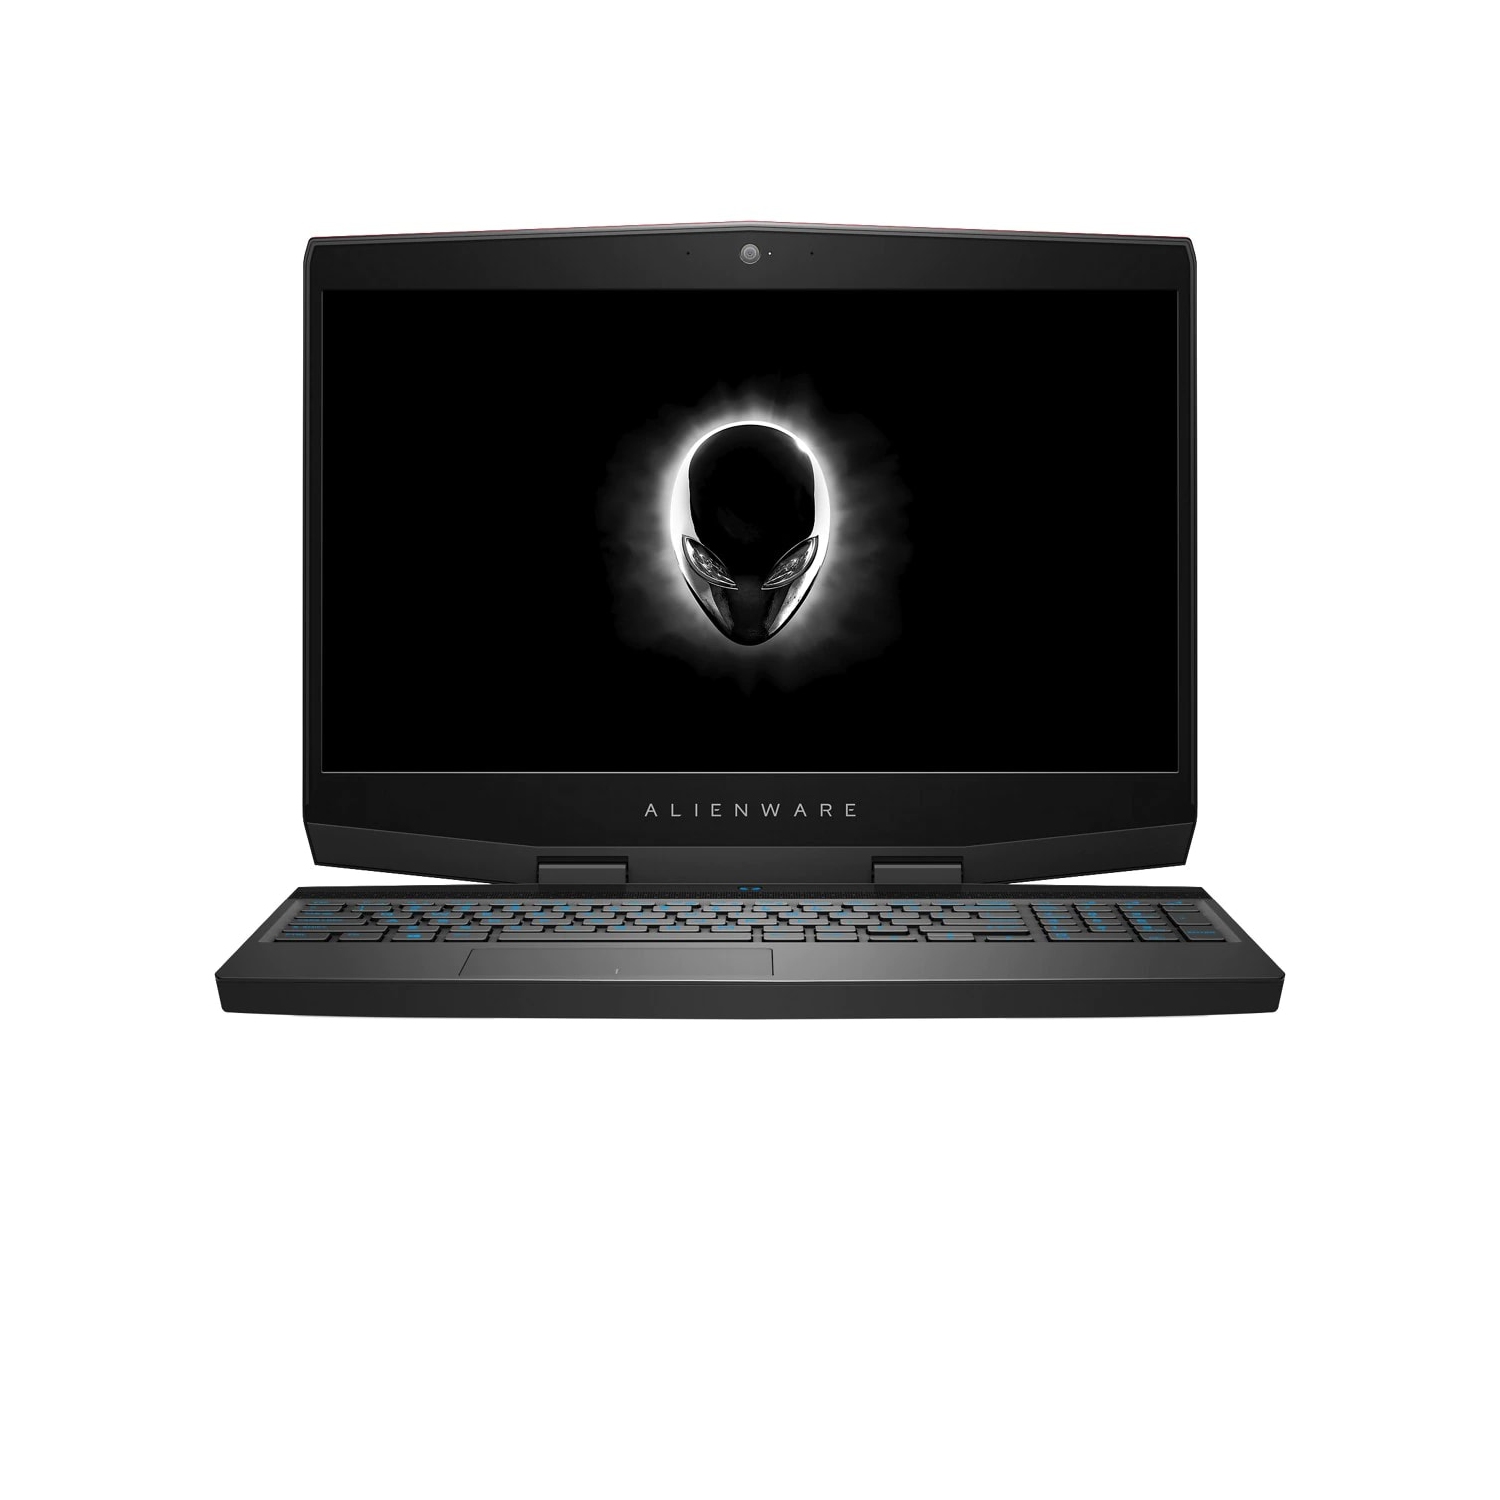 Refurbished (Excellent) – Dell Alienware m15 Gaming Laptop (2018) | 15.6" FHD | Core Ryzen 7 - 128GB SSD - 4GB RAM - RTX 3060 | 8 Cores @ 4.4 GHz - 6GB GDDR6